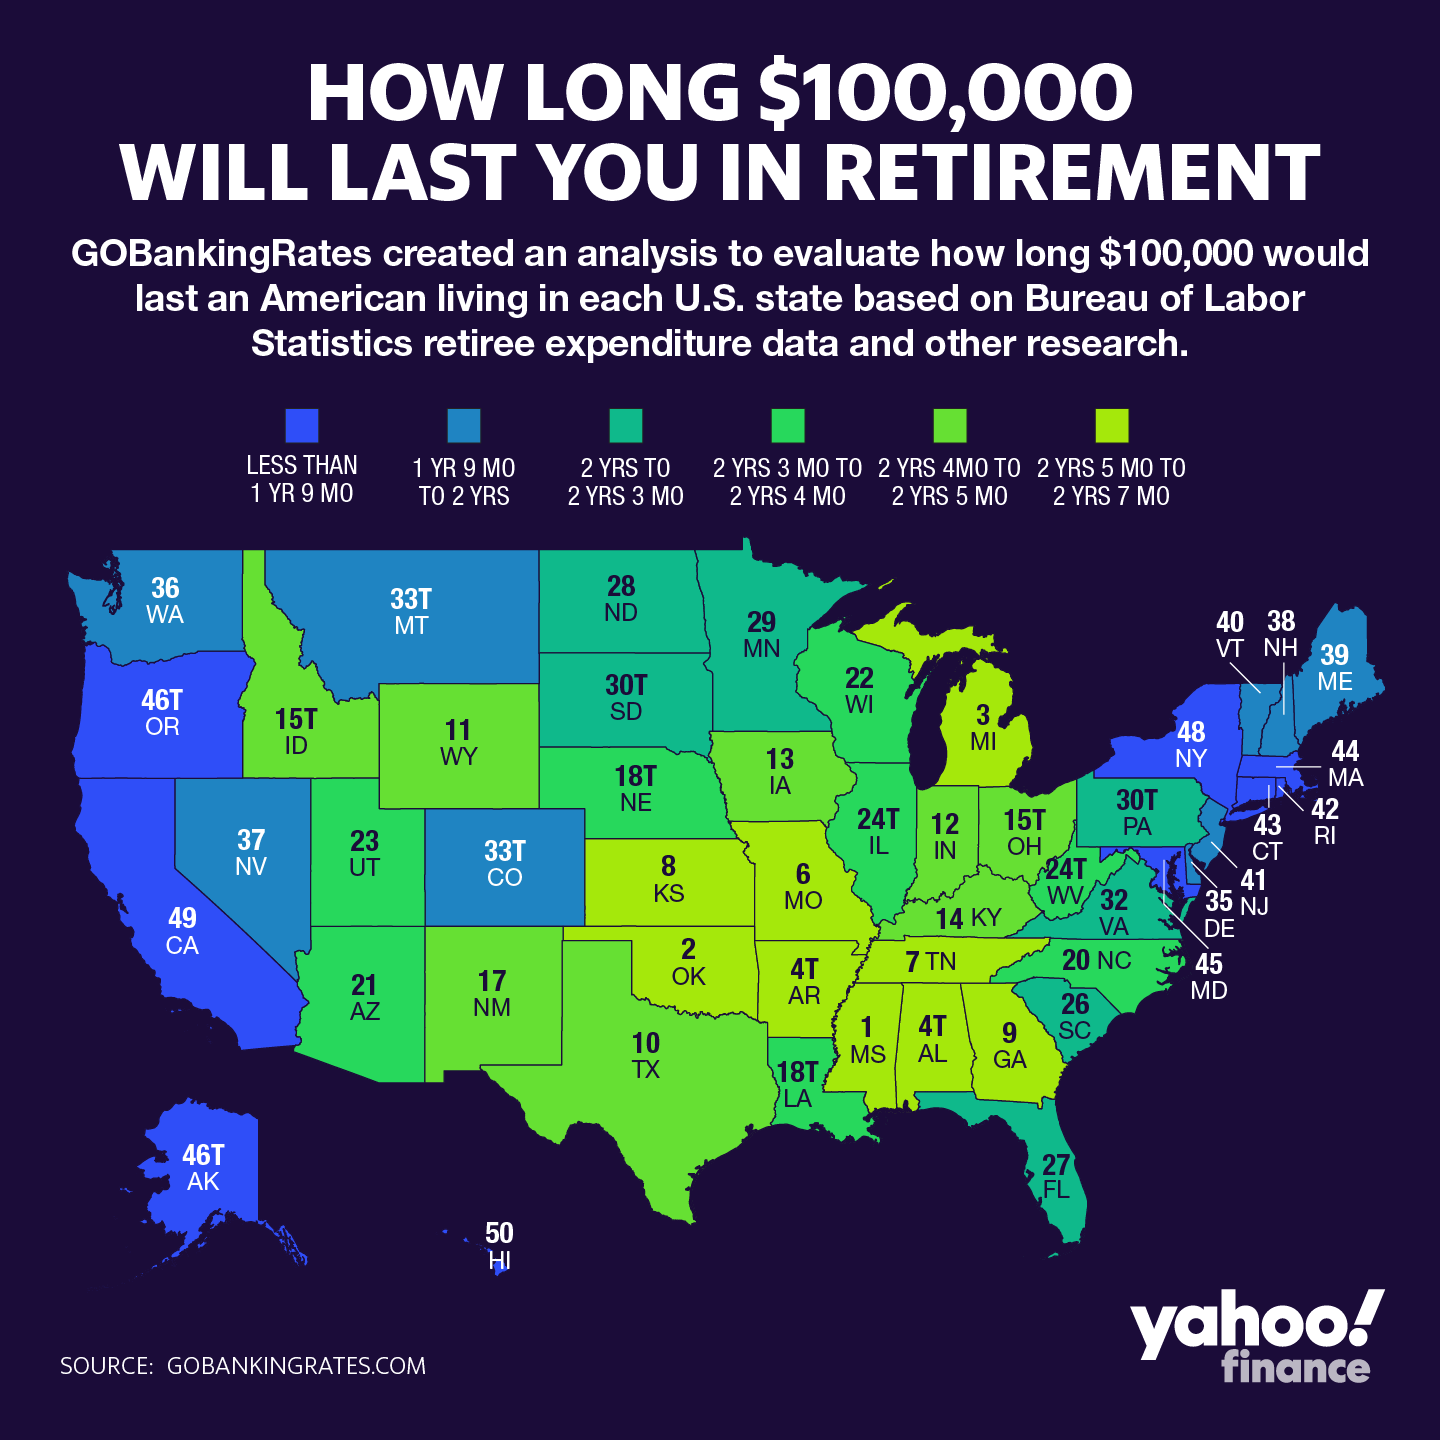 Map Where 100,000 in retirement savings will last the longest